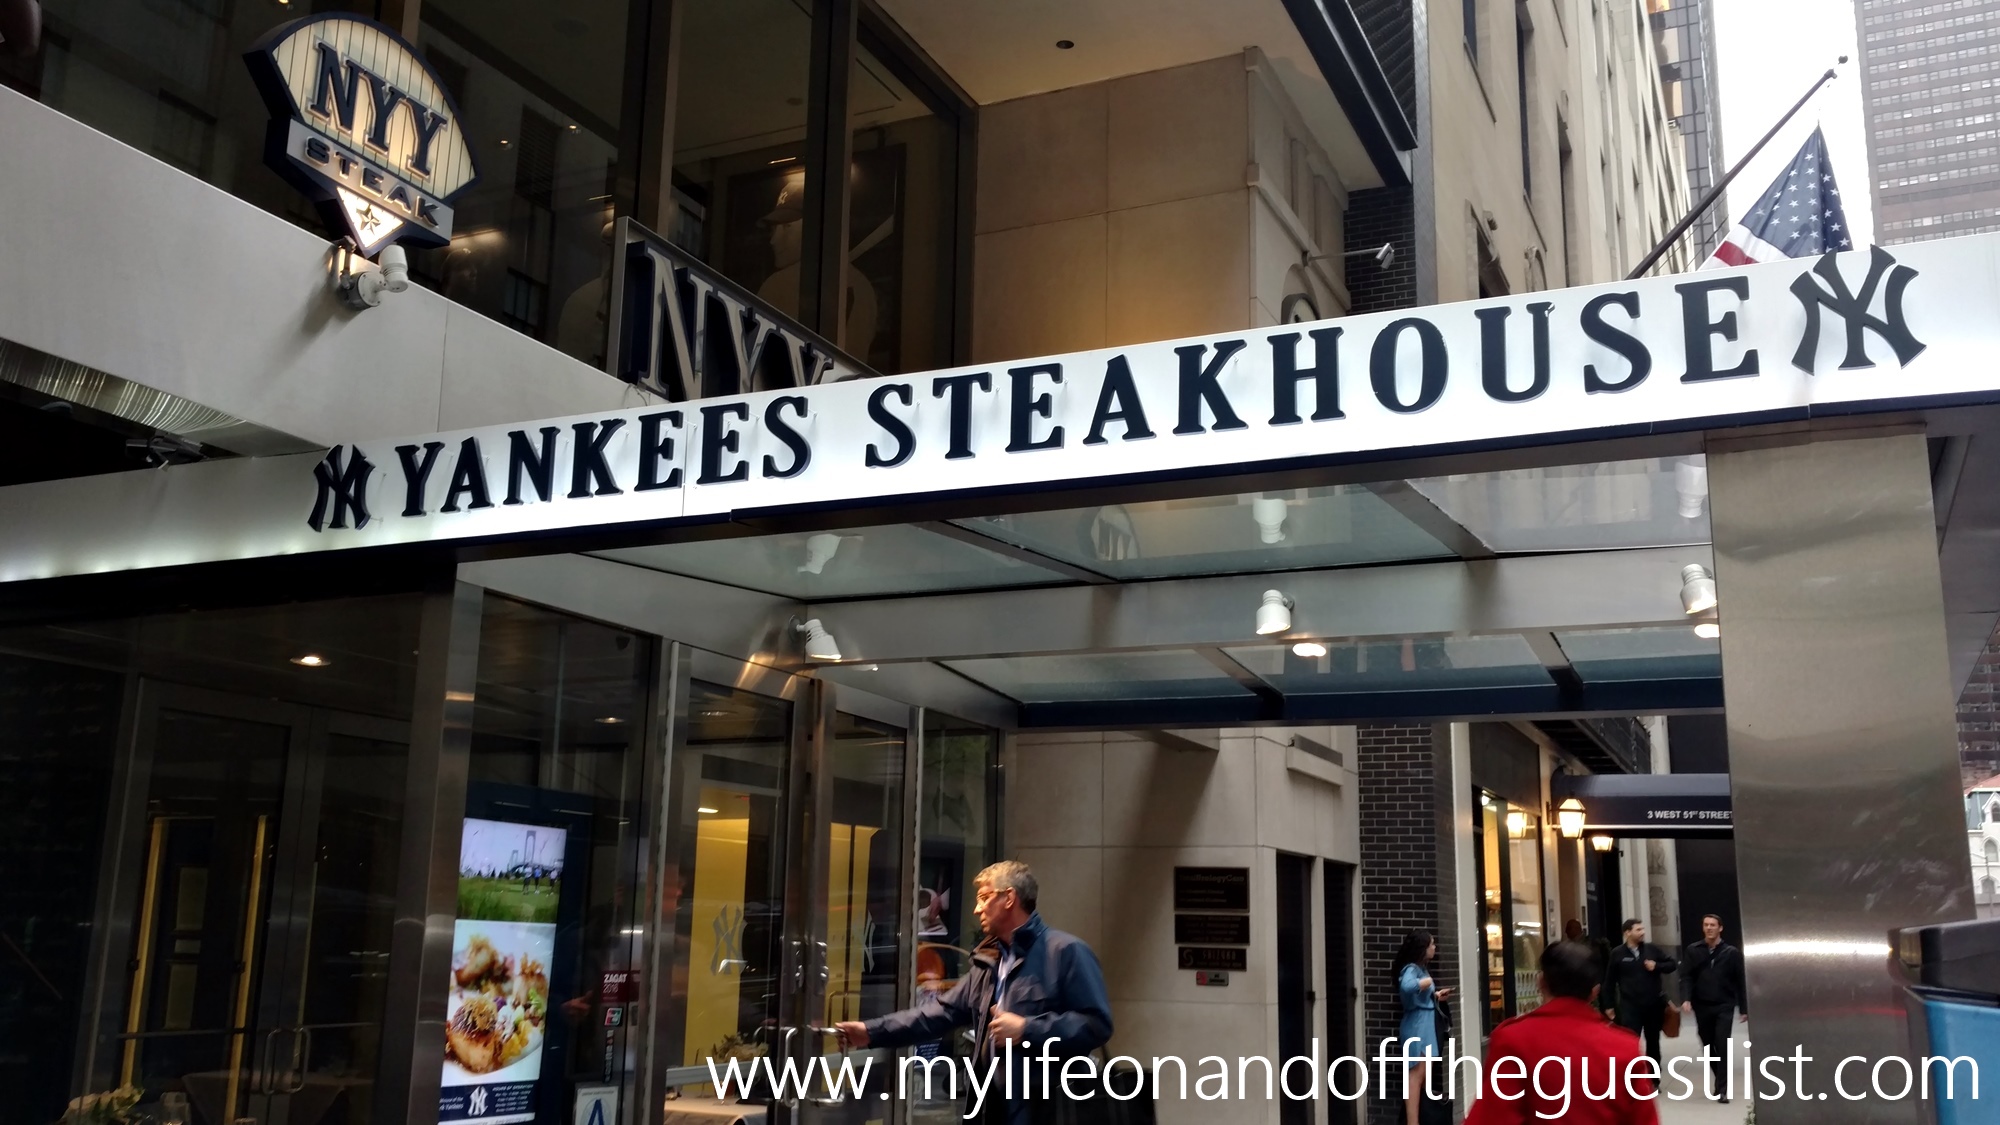 NY Yankees Steakhouse&amp;#39;s Priceless Collection of Yankees Treasures